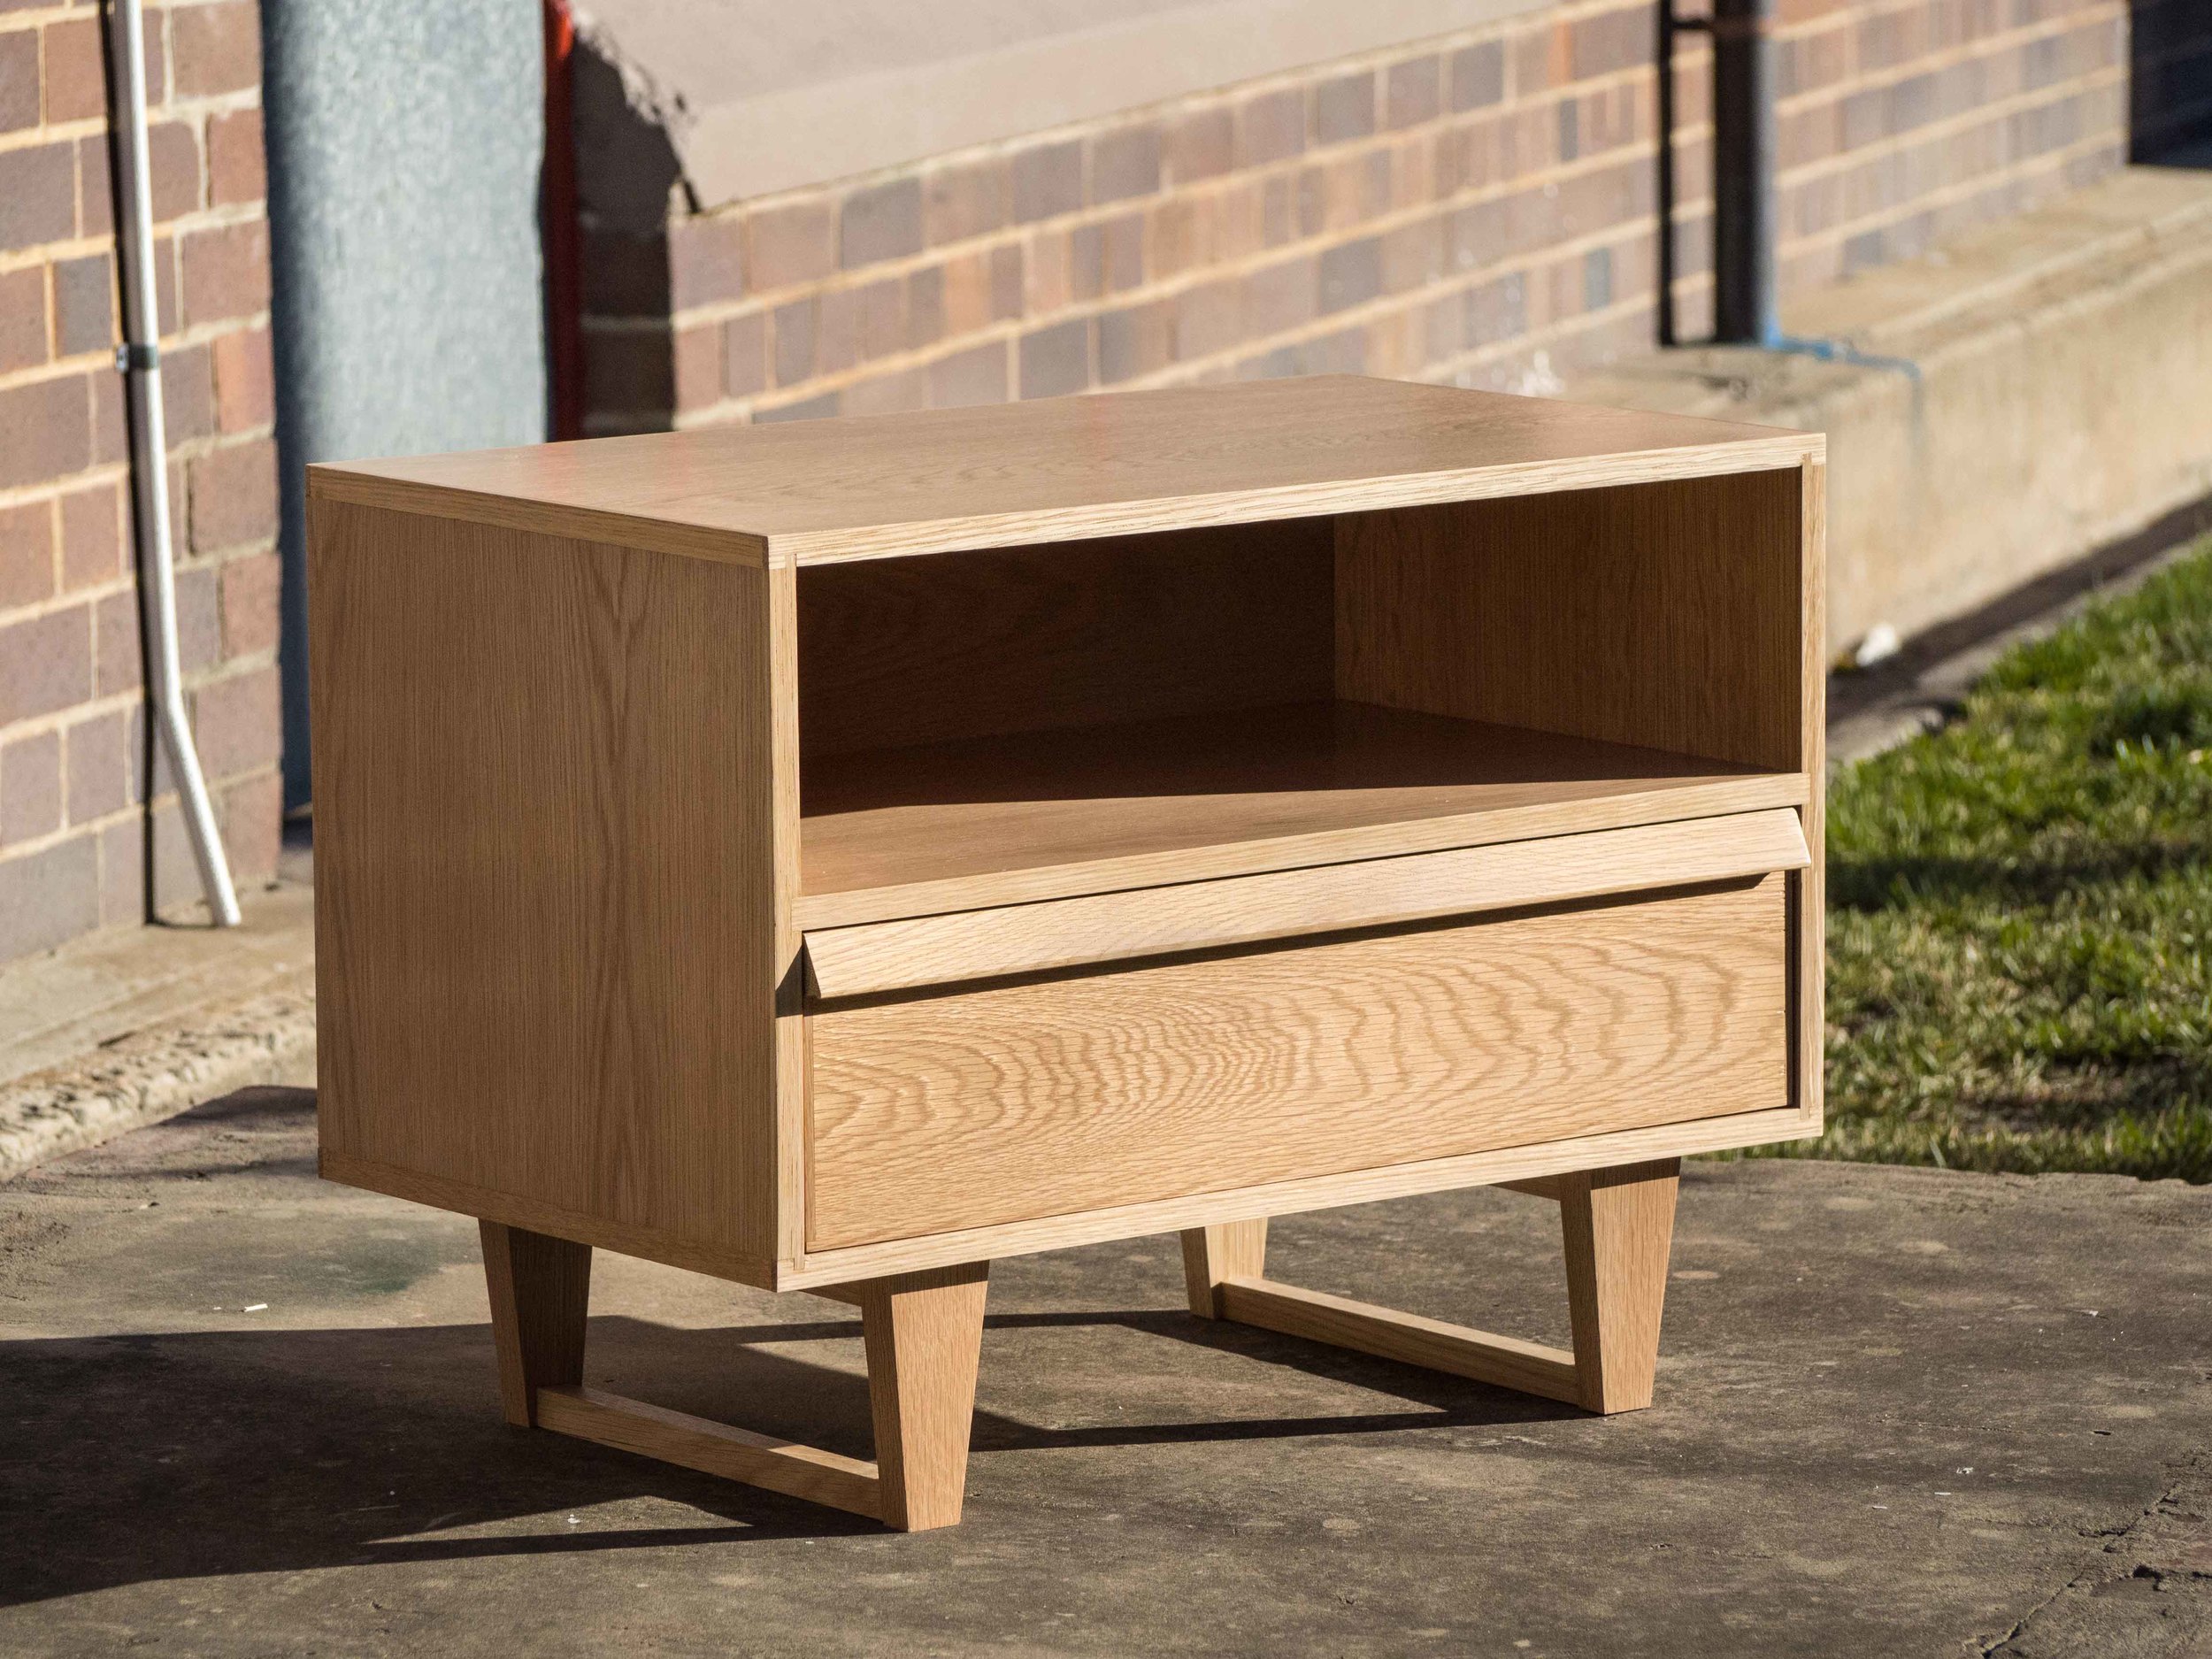 One of two fifties inspired bedside cabinets by Andy.